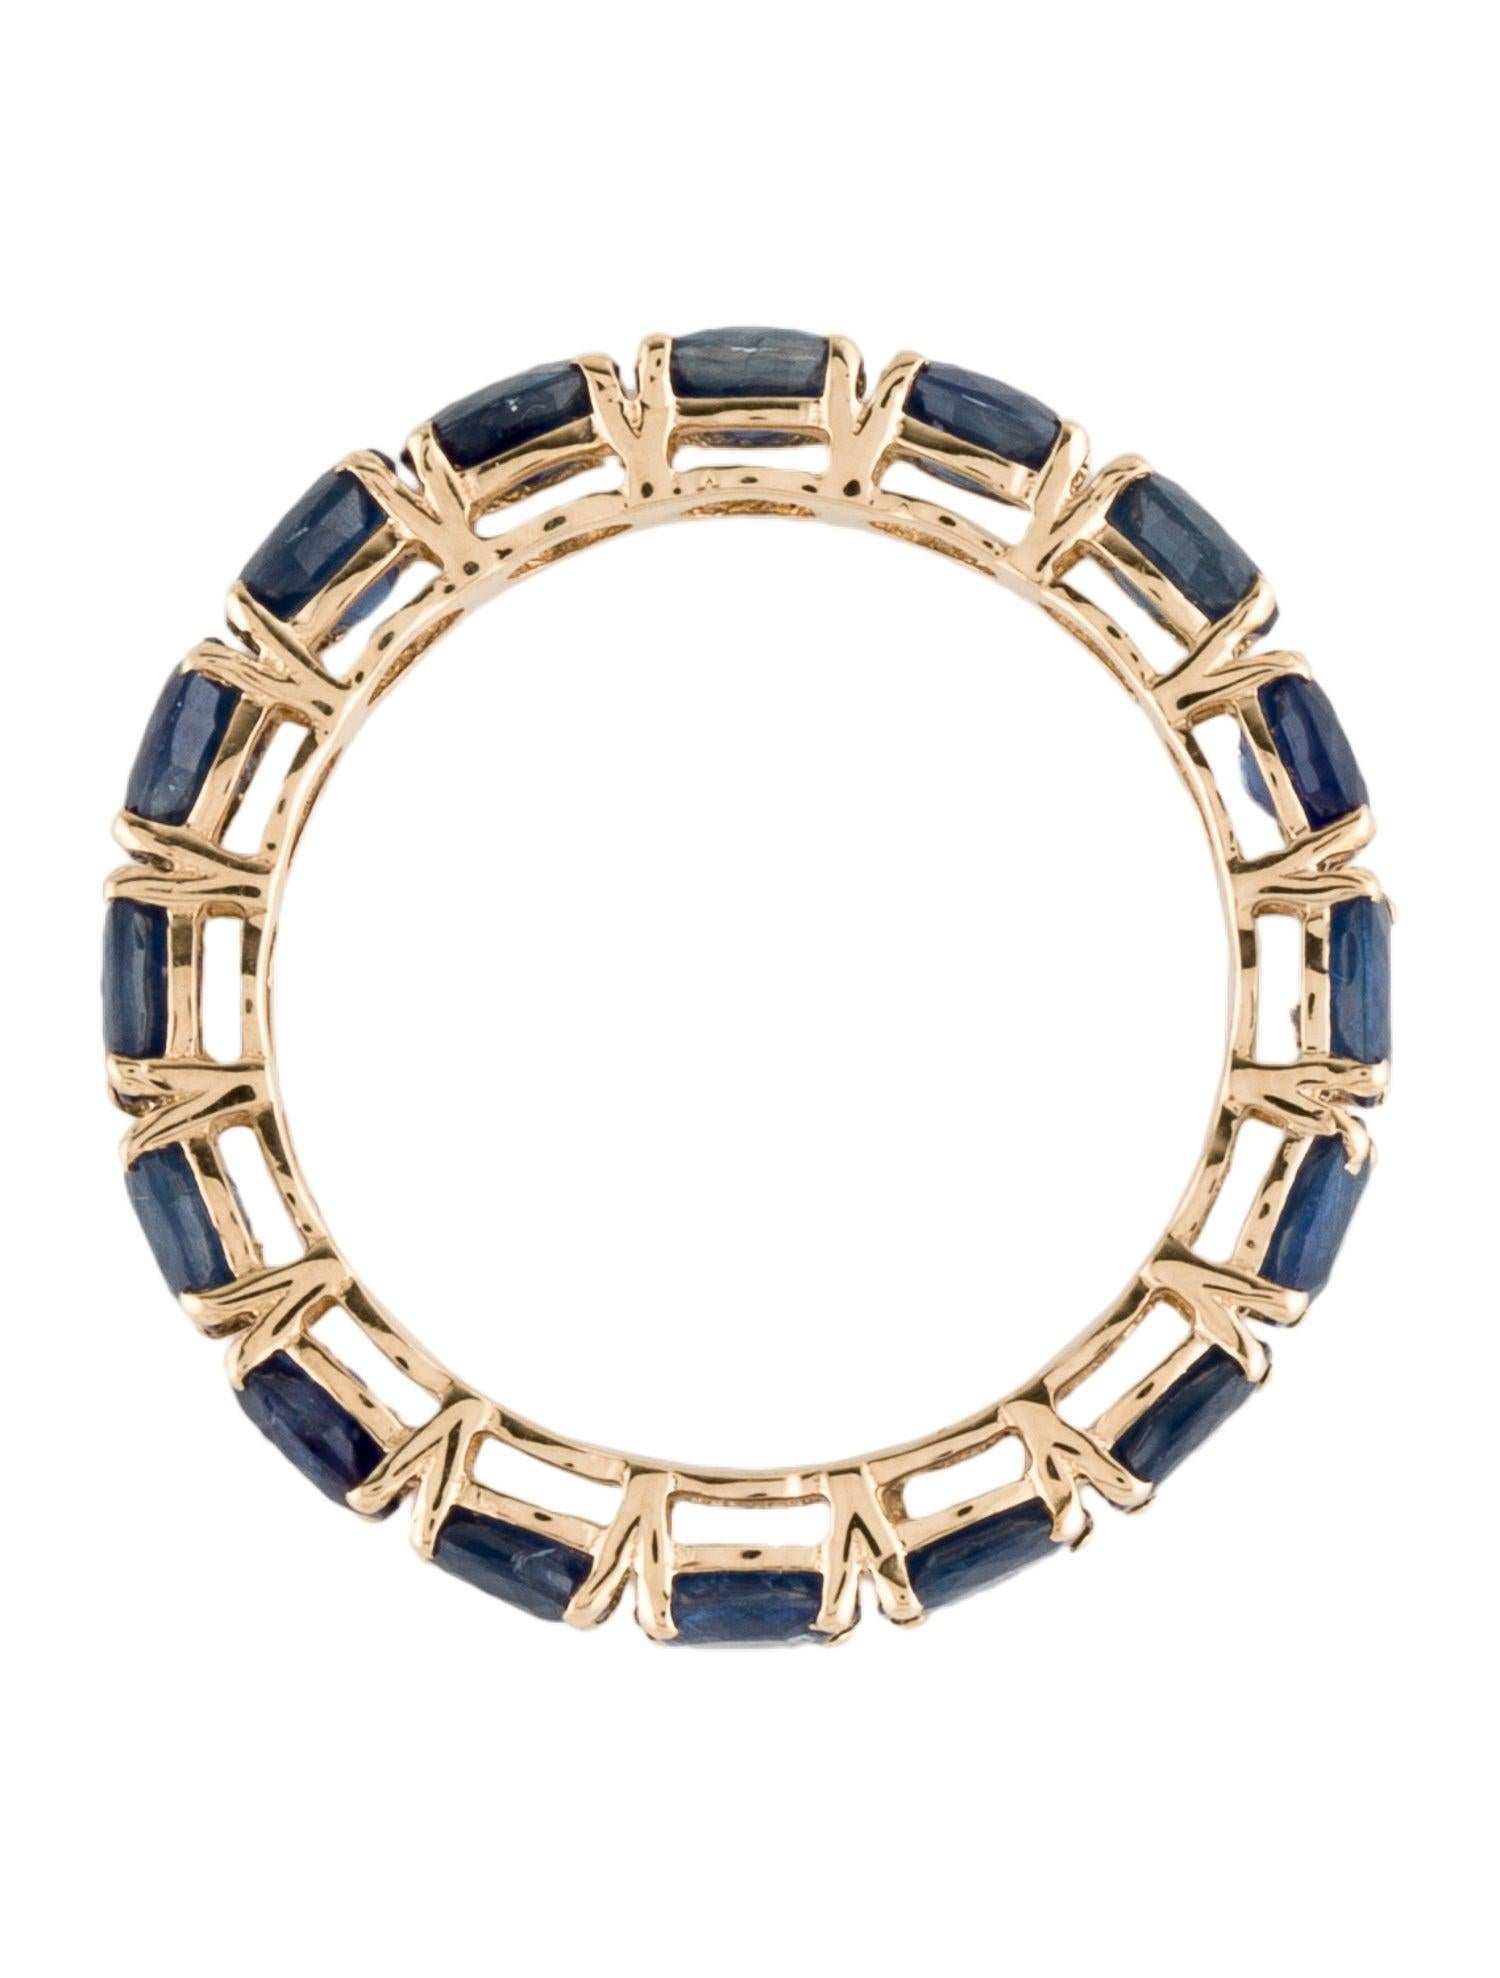 Luxurious 14K Gold 2.54ctw Sapphire Eternity Band - Size 6.75 - Elegant Jewelry In New Condition For Sale In Holtsville, NY